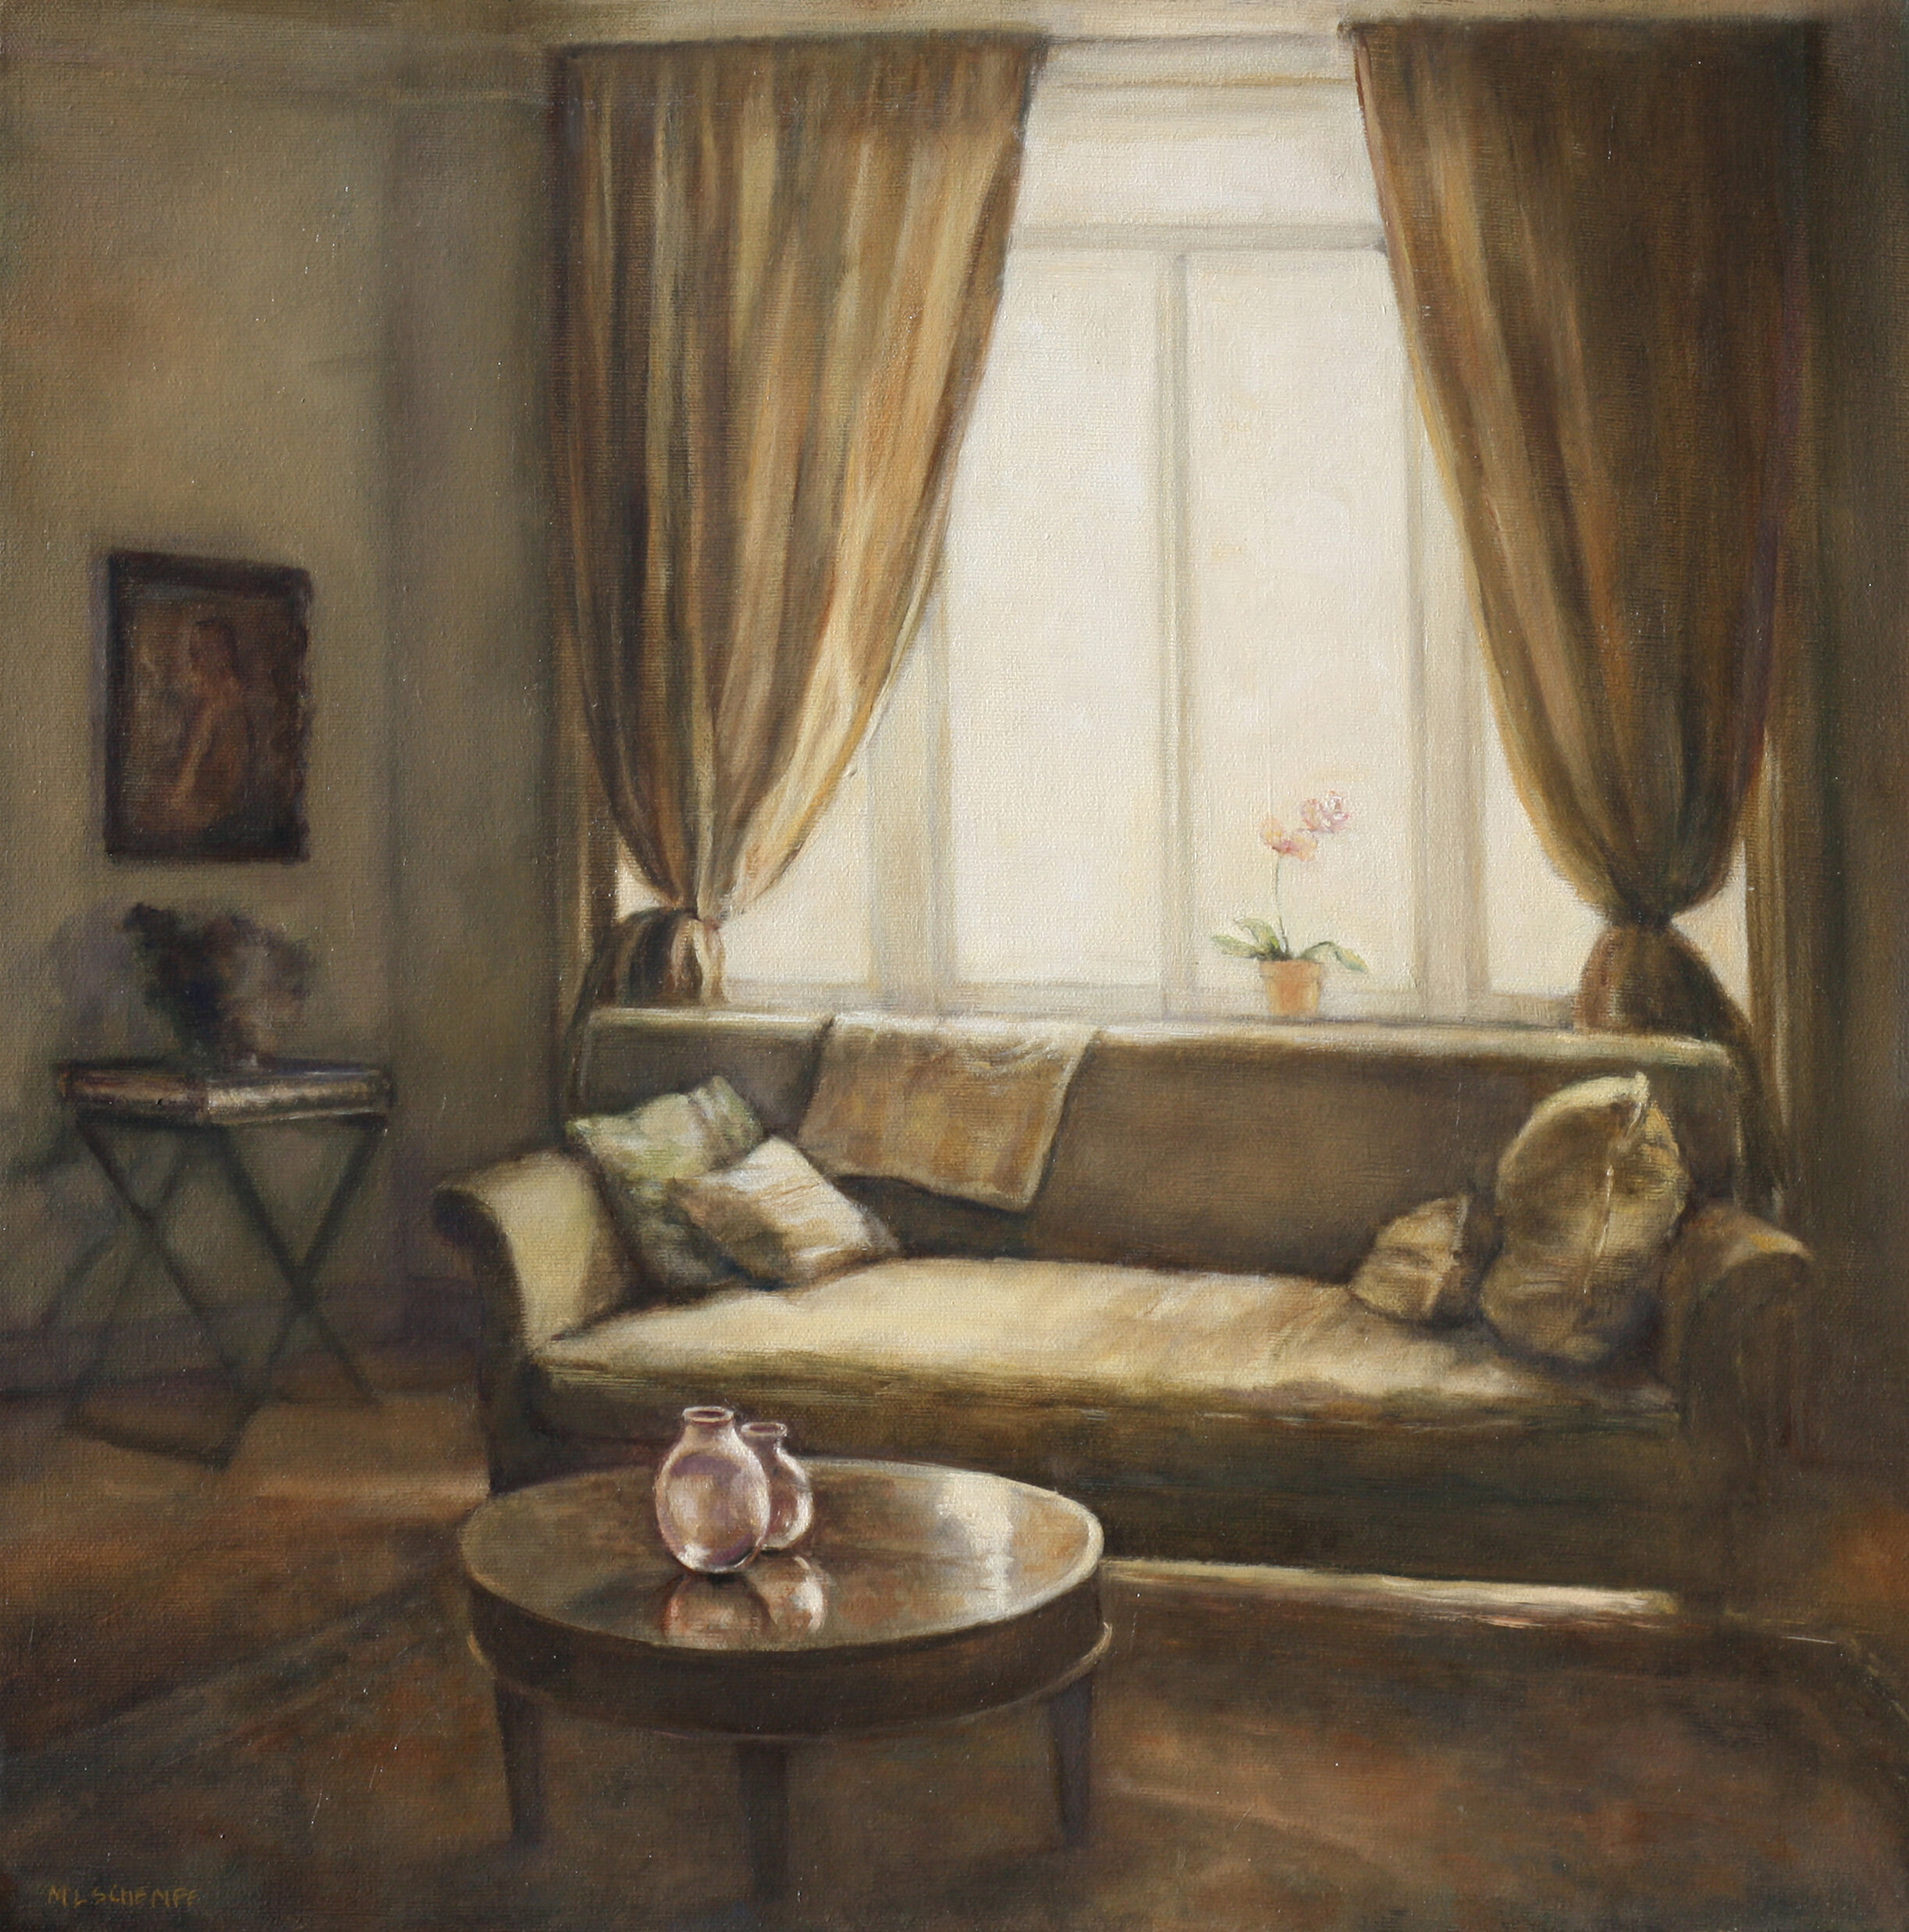  Mary Lou Schempf  Interior with Afternoon Light,  18” x 18”, oil on canvas  (private collection)  